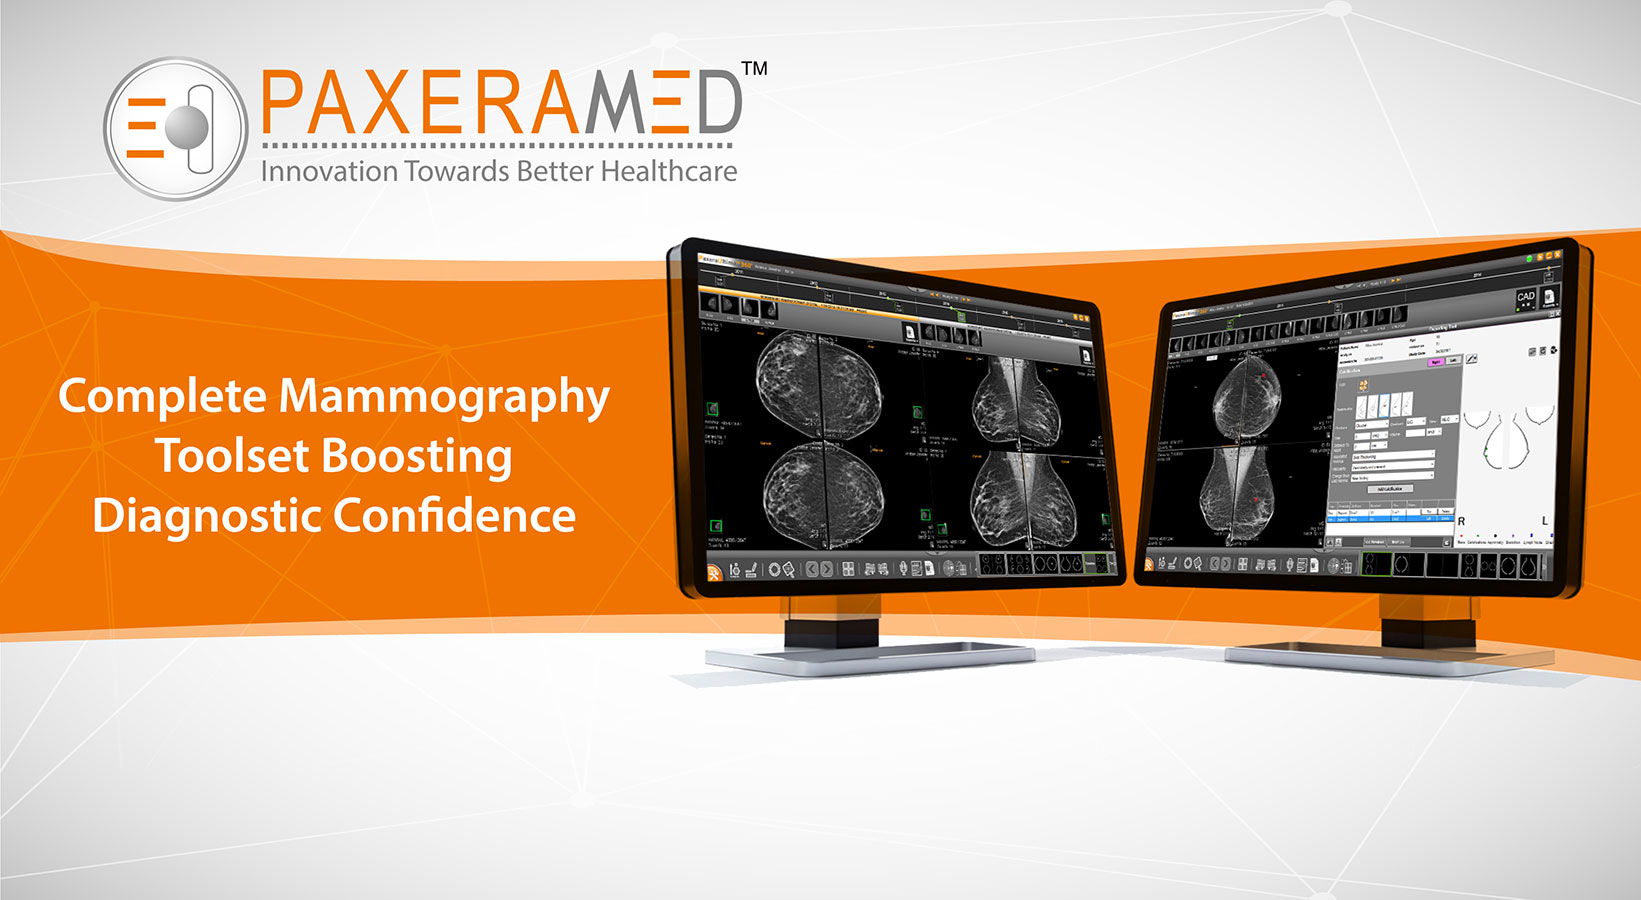 Complete Mammography Toolset Boosting Diagnostic Confidence